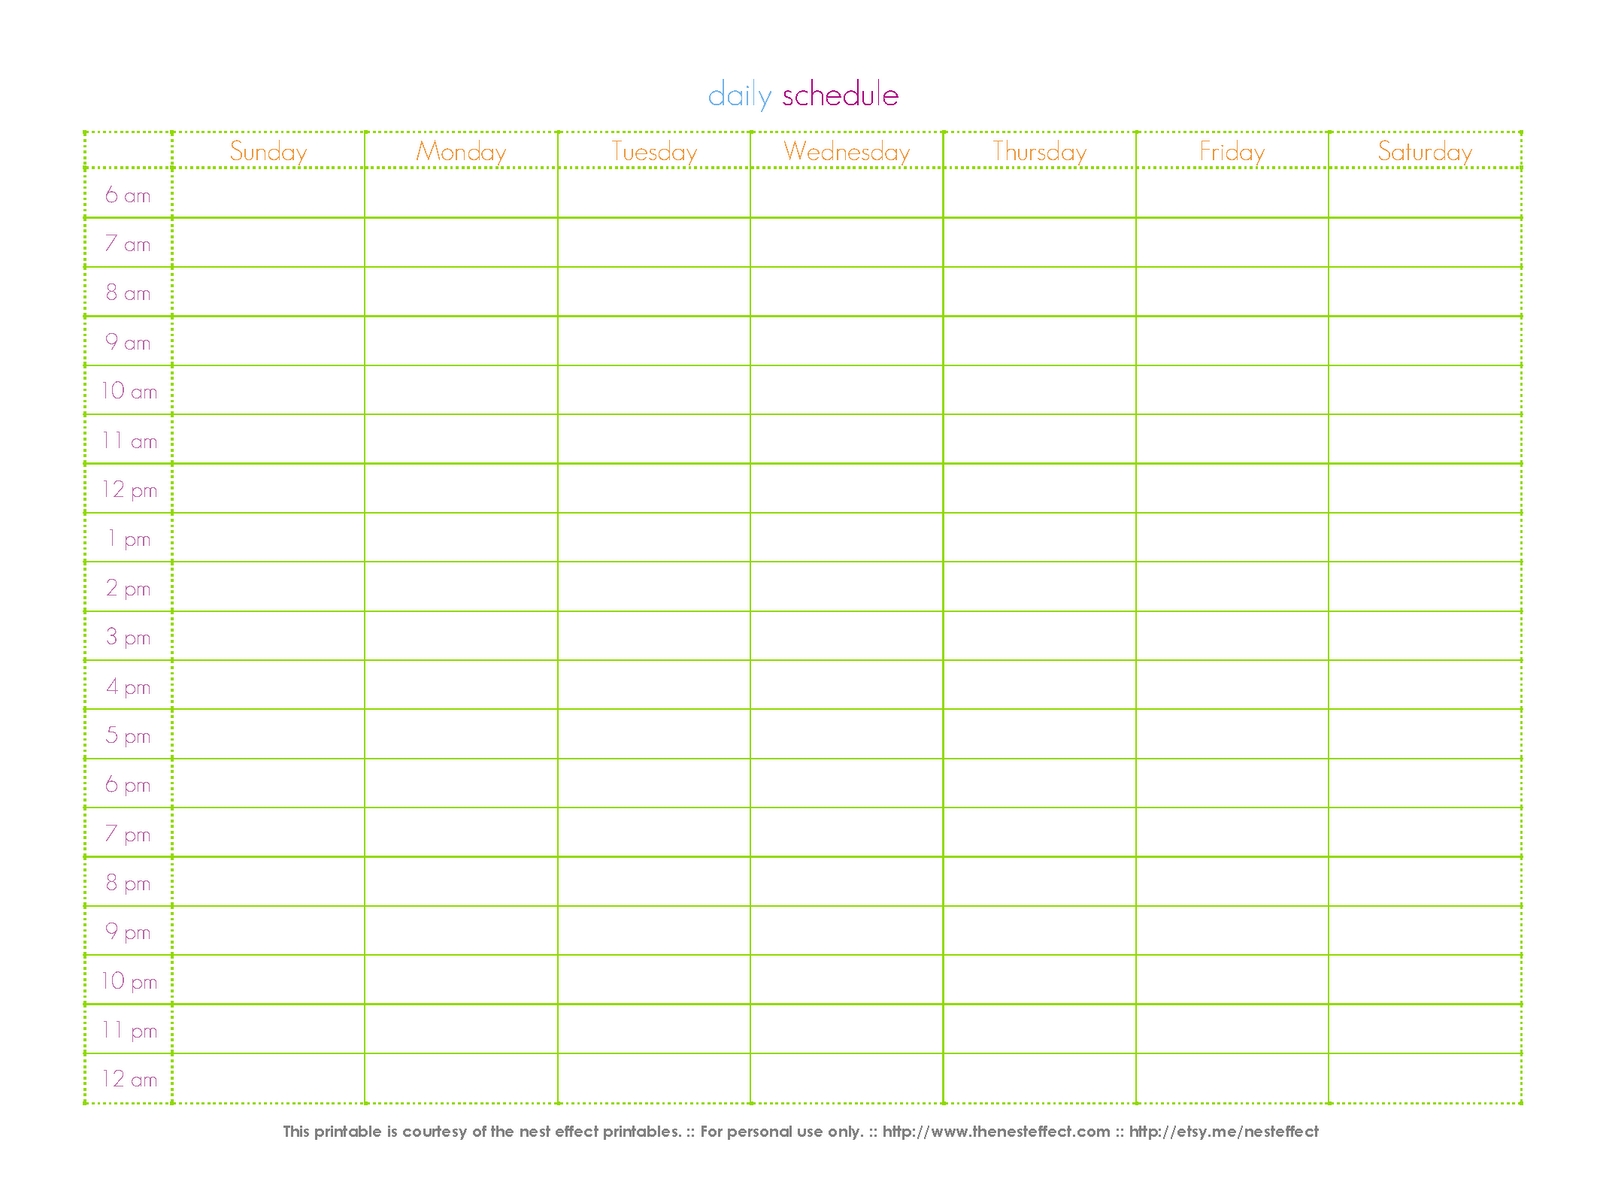 6 Best Images Of Printable Daily Schedule By Hour - Free